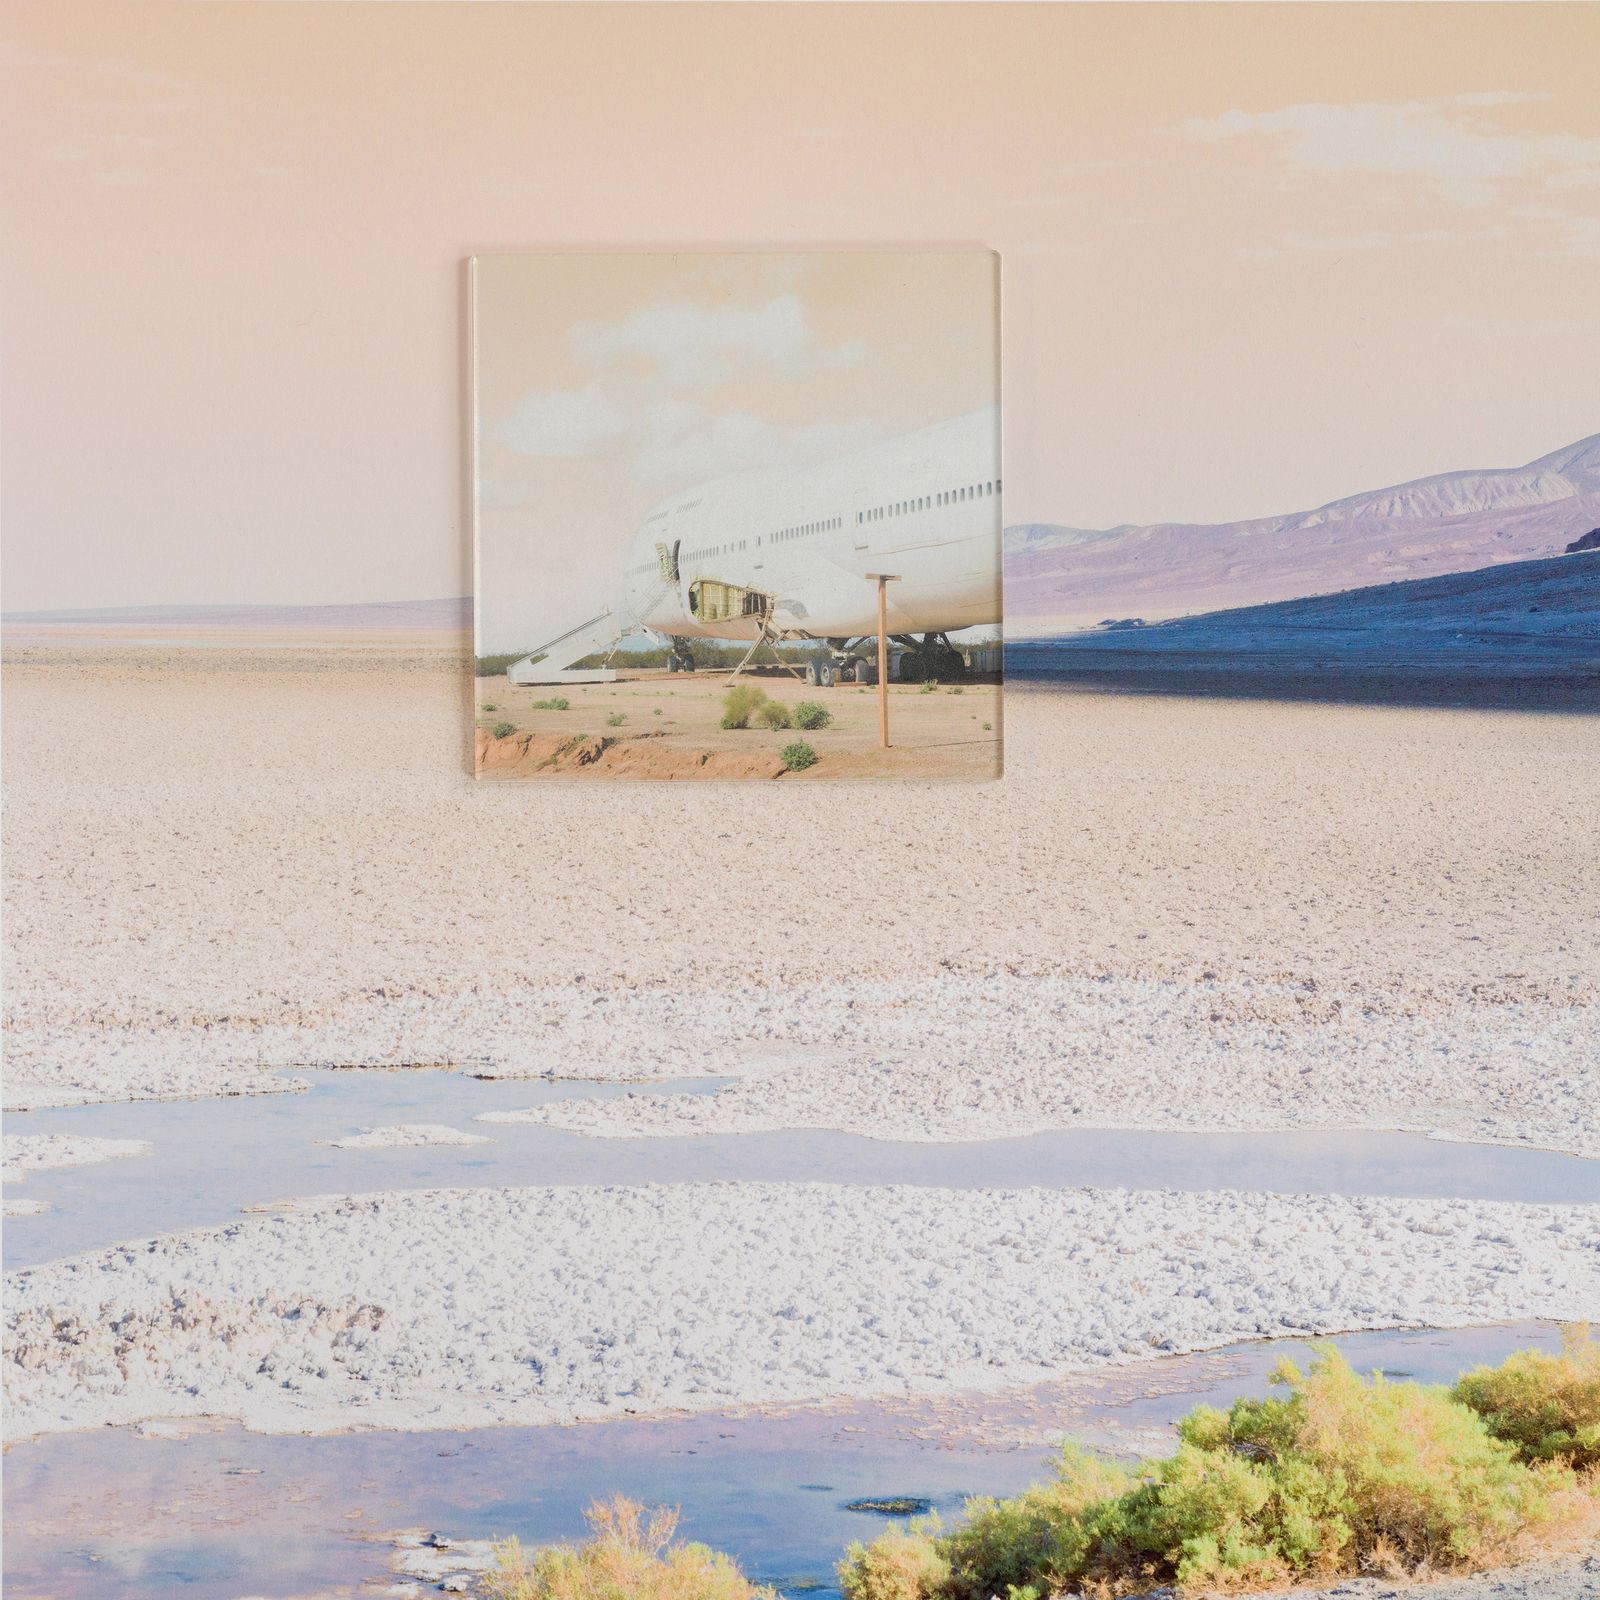 © Diana Cheren Nygren - Arrivals and Departures Image with mounted acrylic inset. Landscape - Death Valley. Inset - New Mexico.